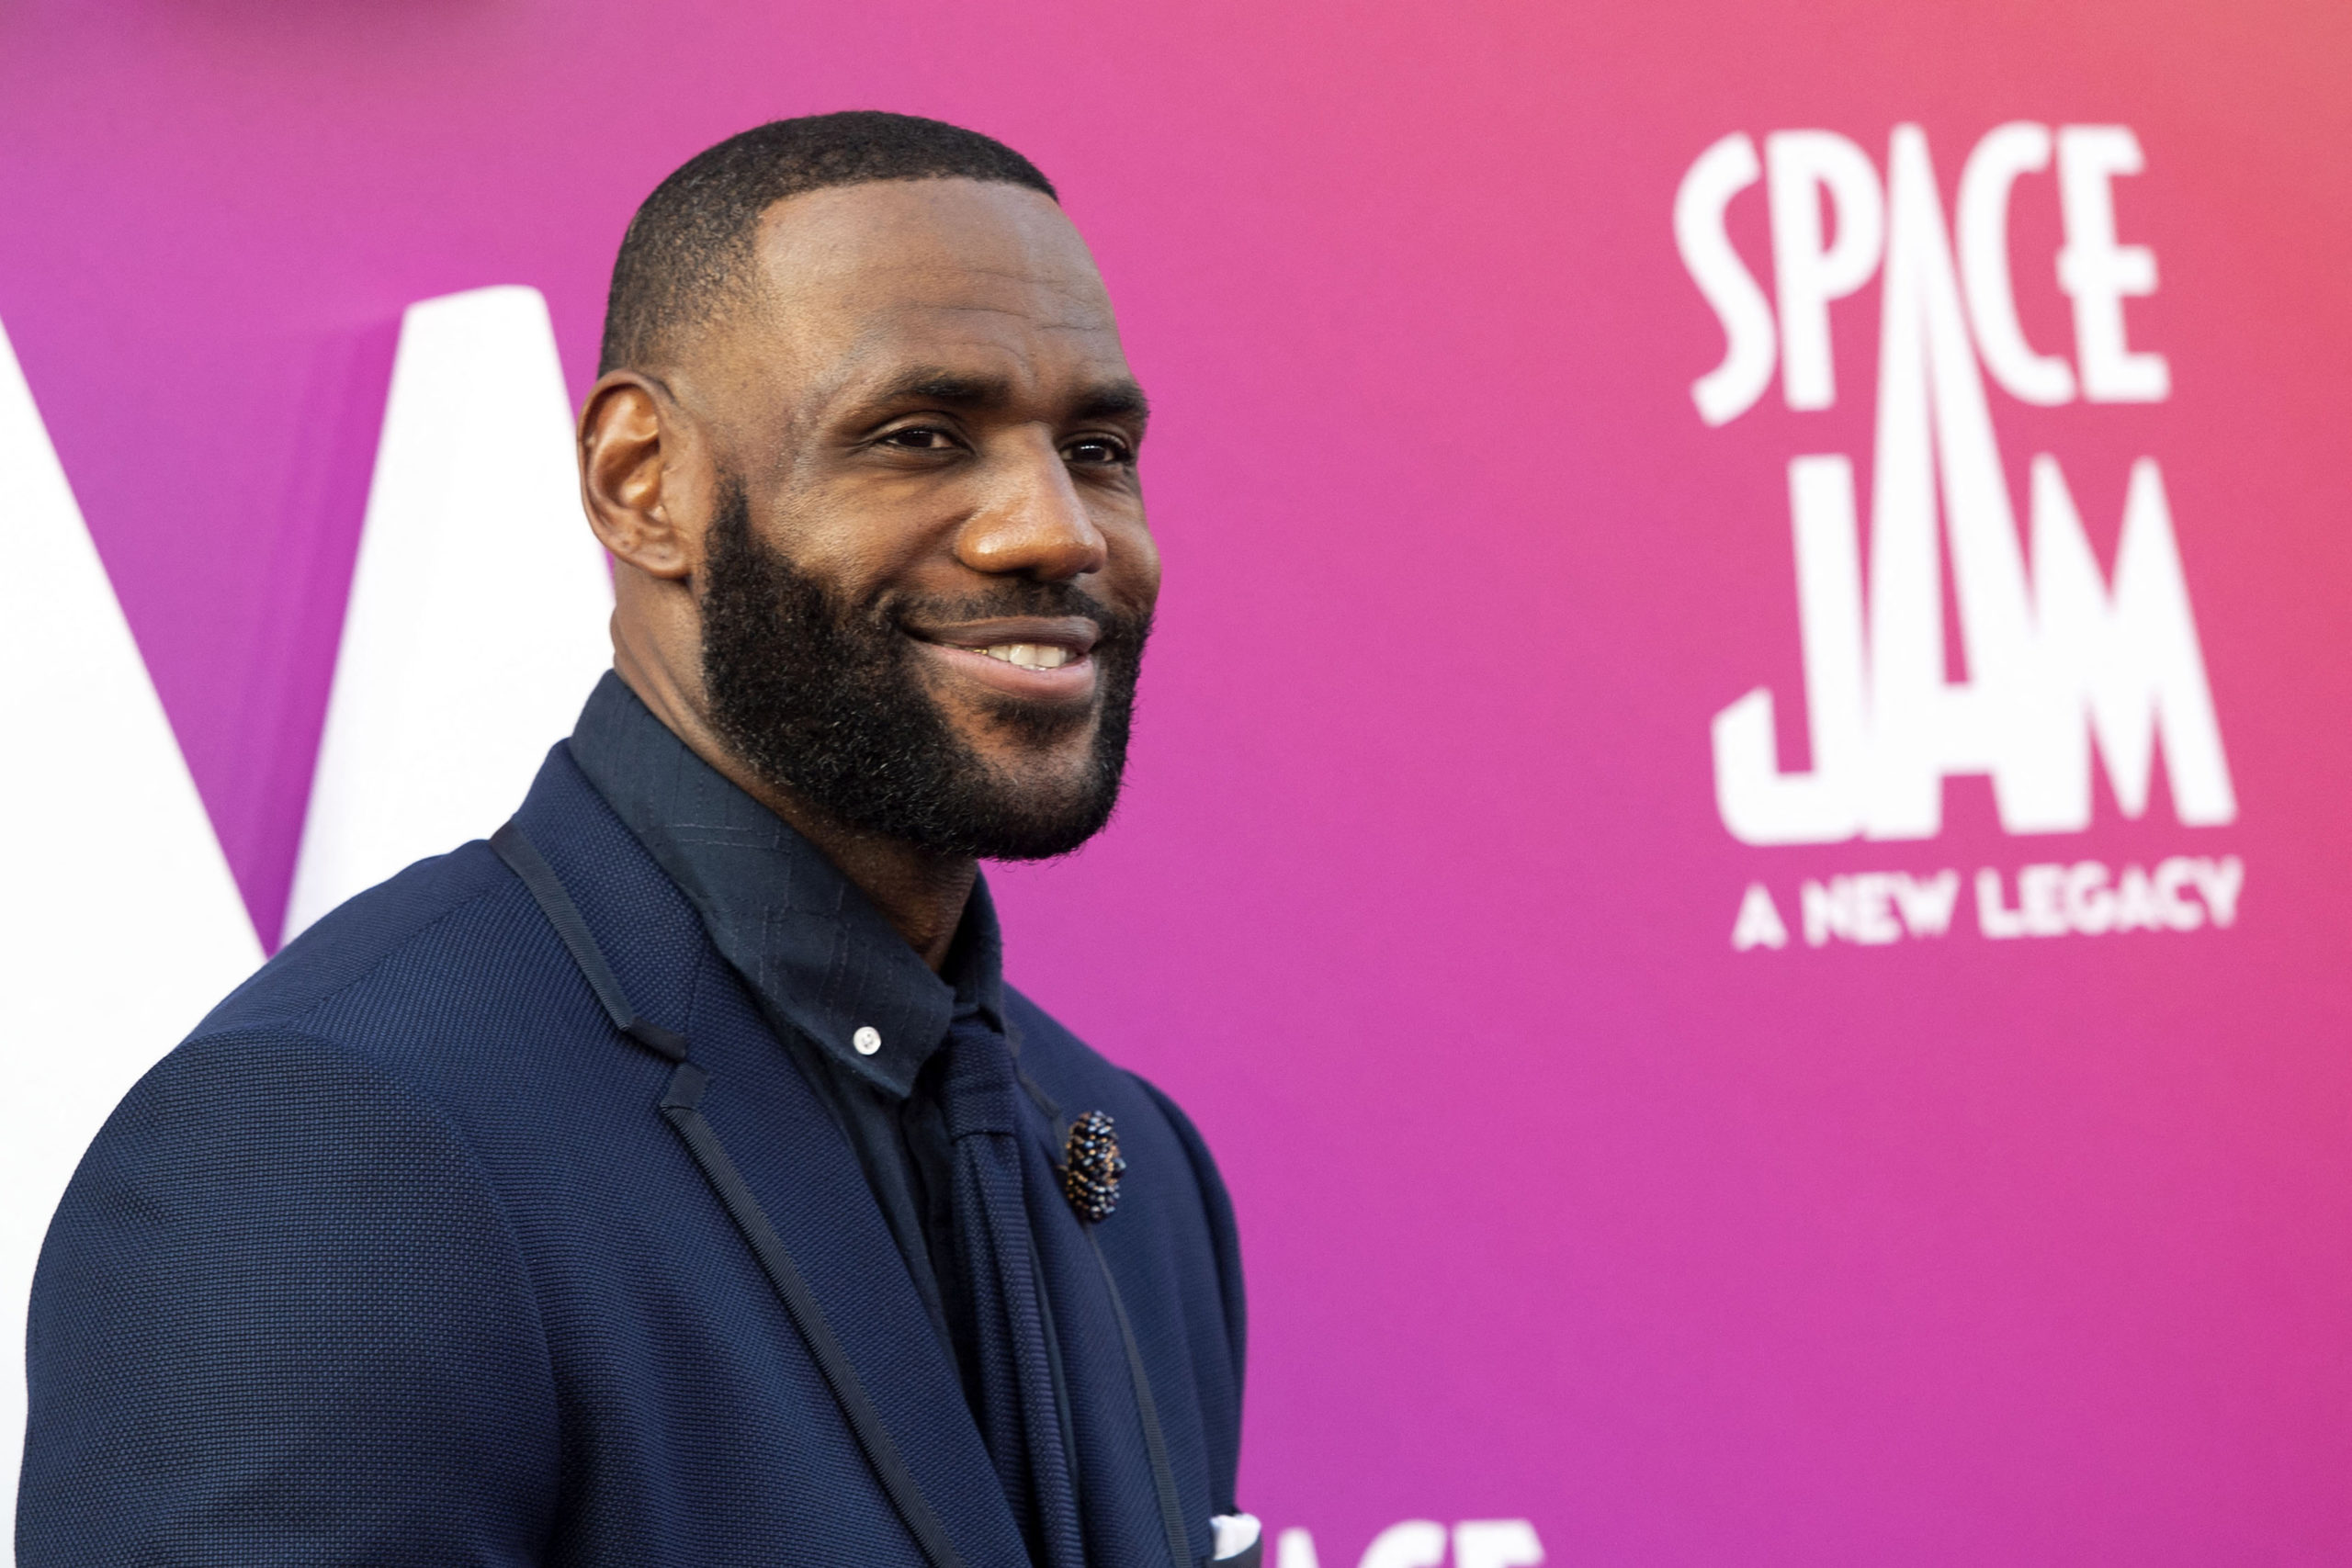 Basketball player/actor LeBron James arrives at the Warner Bros Pictures world premiere of "Space Jam: A New Legacy" at the Regal LA Live in Los Angeles, California, July 12, 2021. (Photo by VALERIE MACON / AFP)